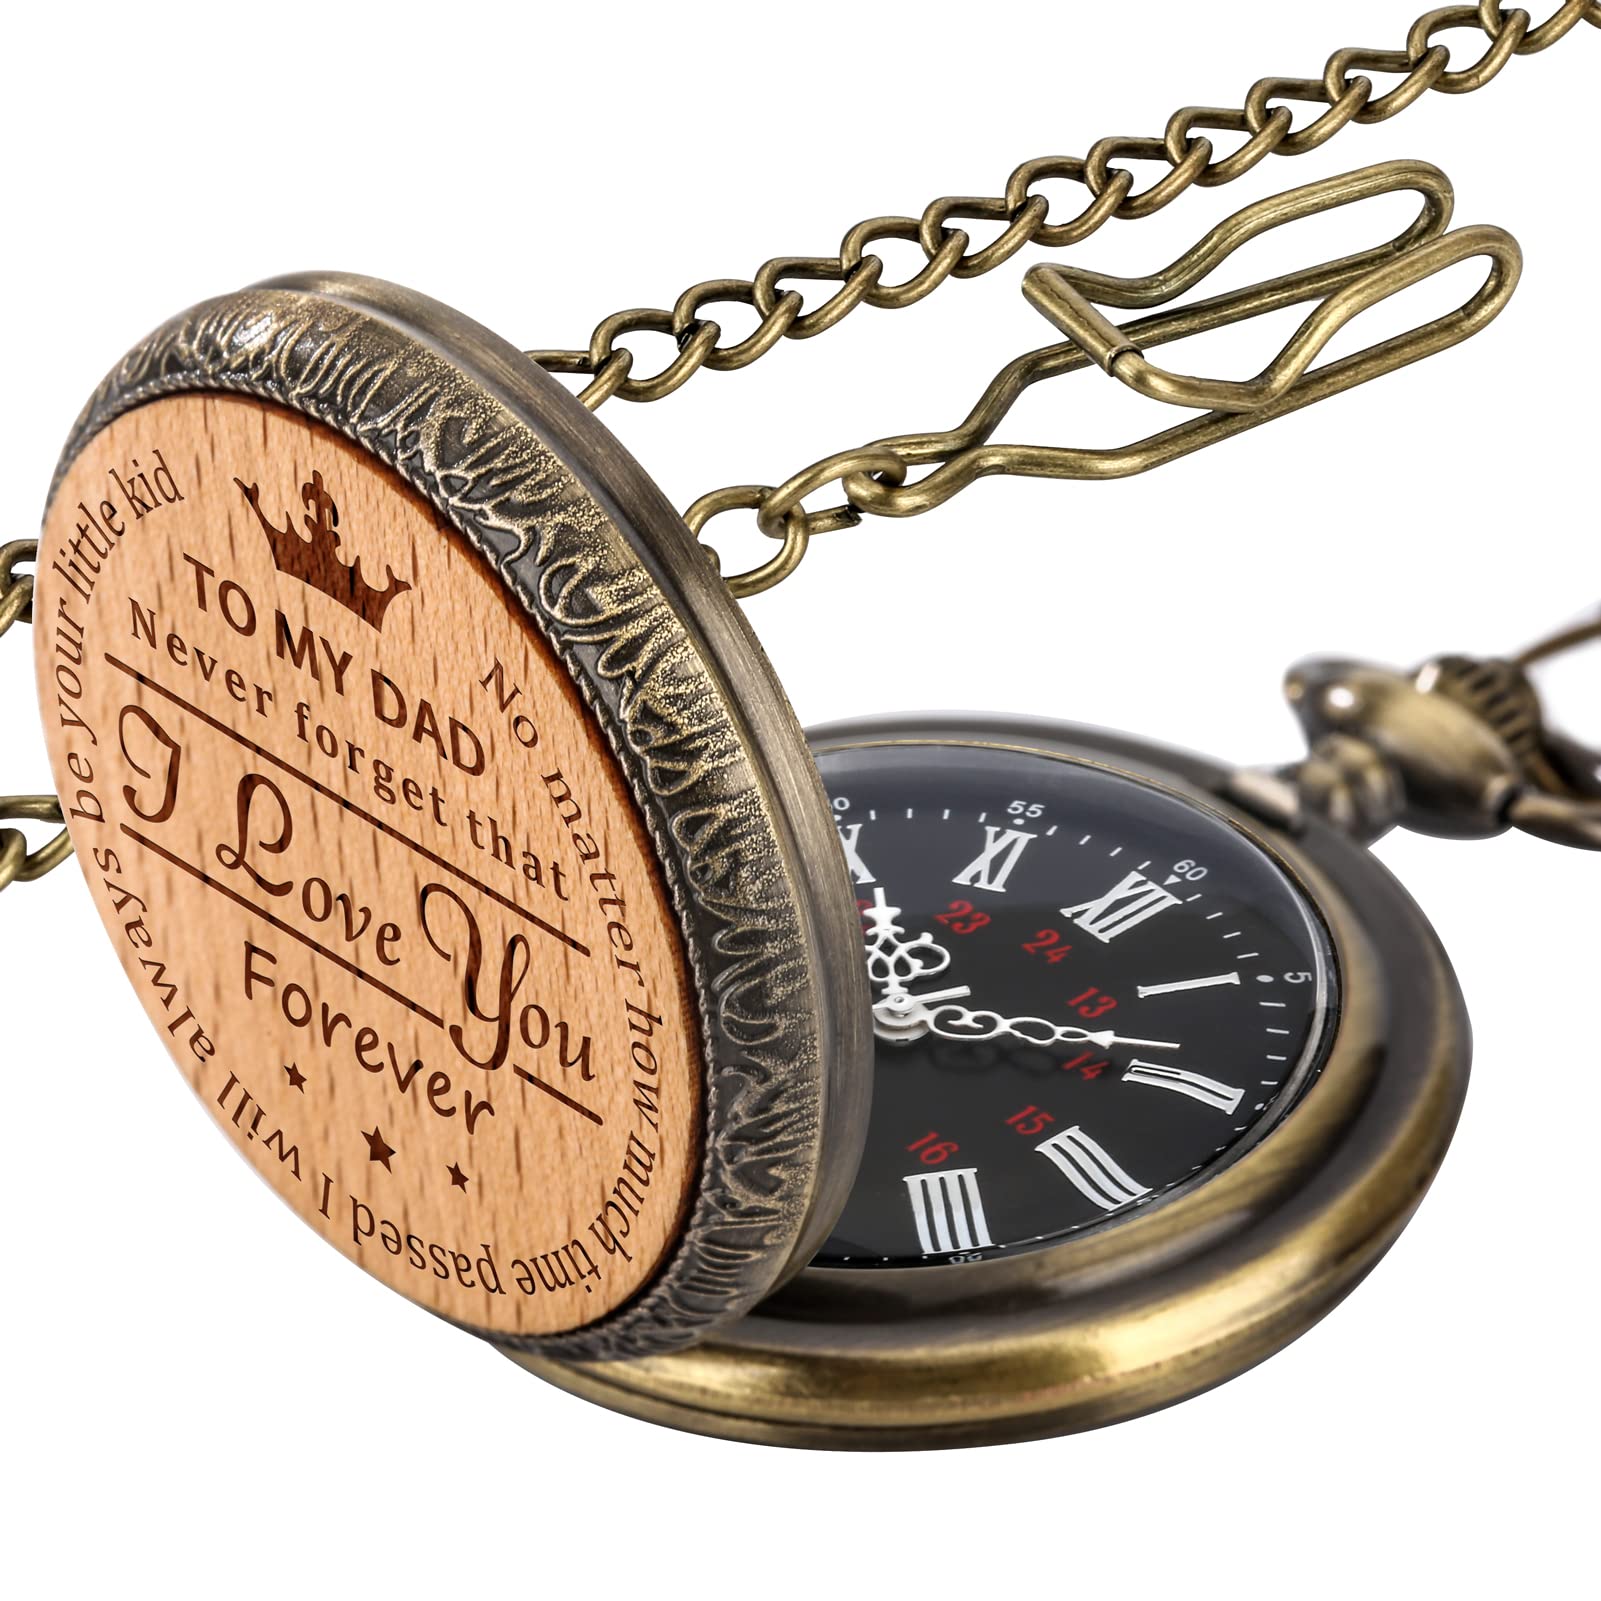 YISUYA Engraved Antique Personalized Pocket Watch and Chain Steampunk Fob Vintage Pocket Watches for Men Souvenirs Birthday Gifts for Men, to My Dad, to My Son